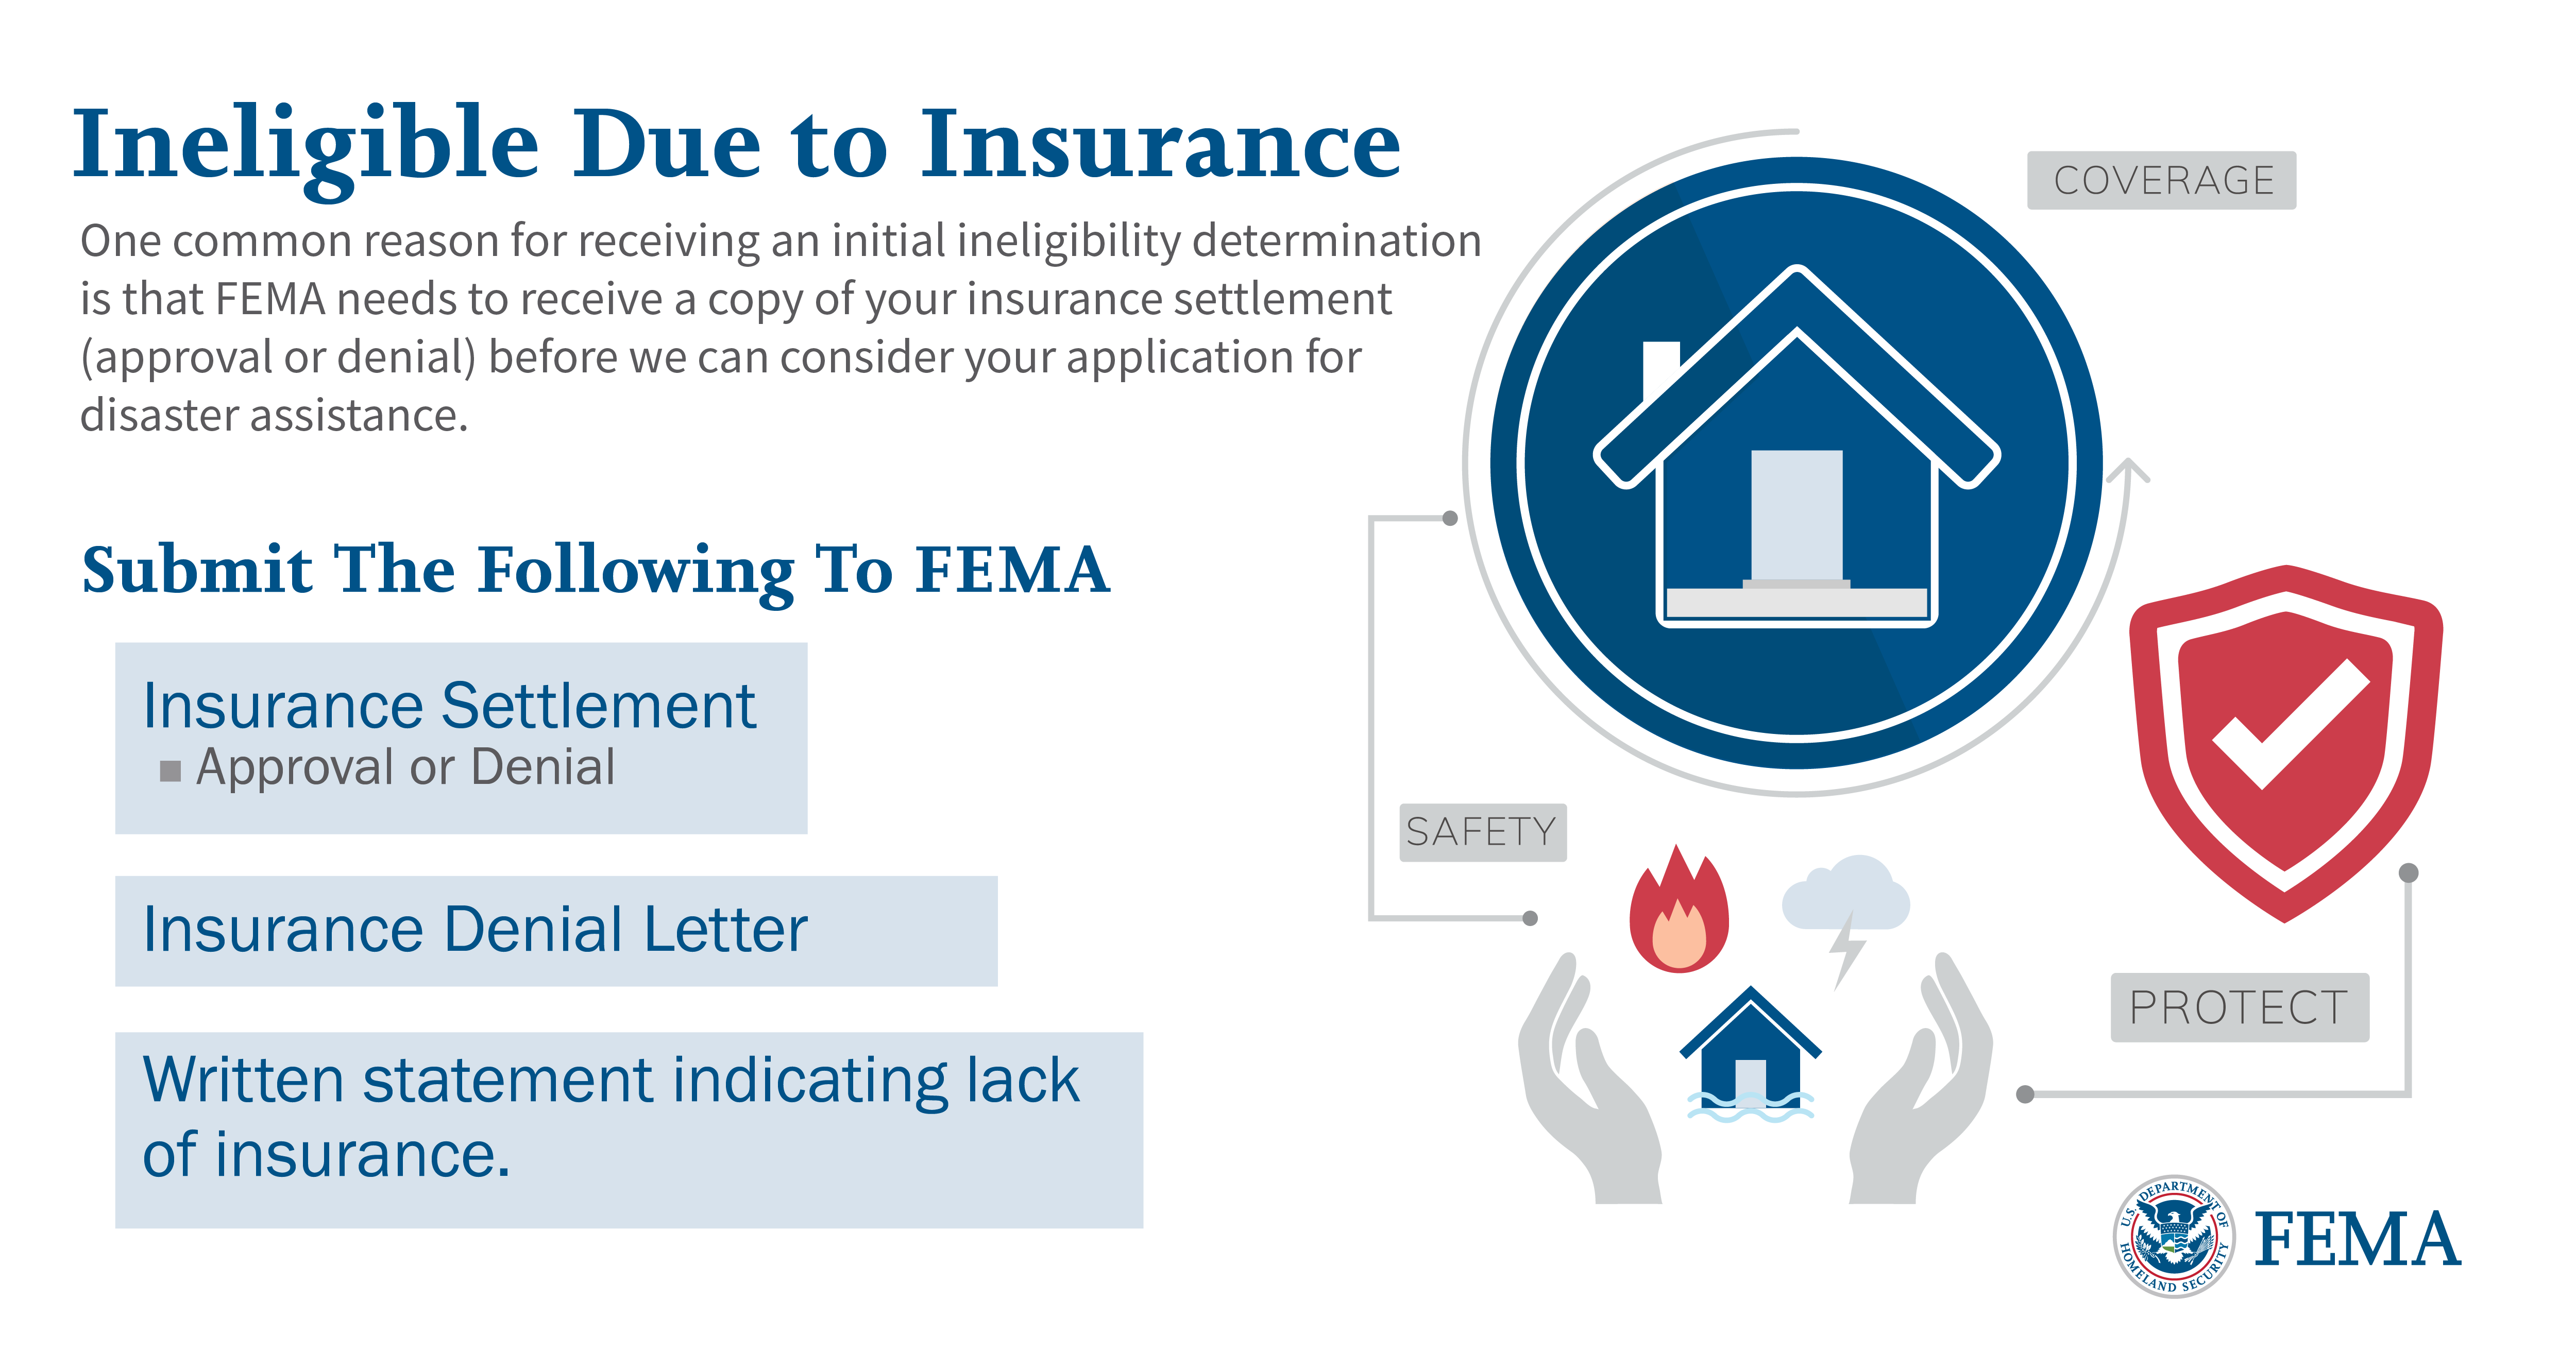 Ineligible Due to Insurance Graphic